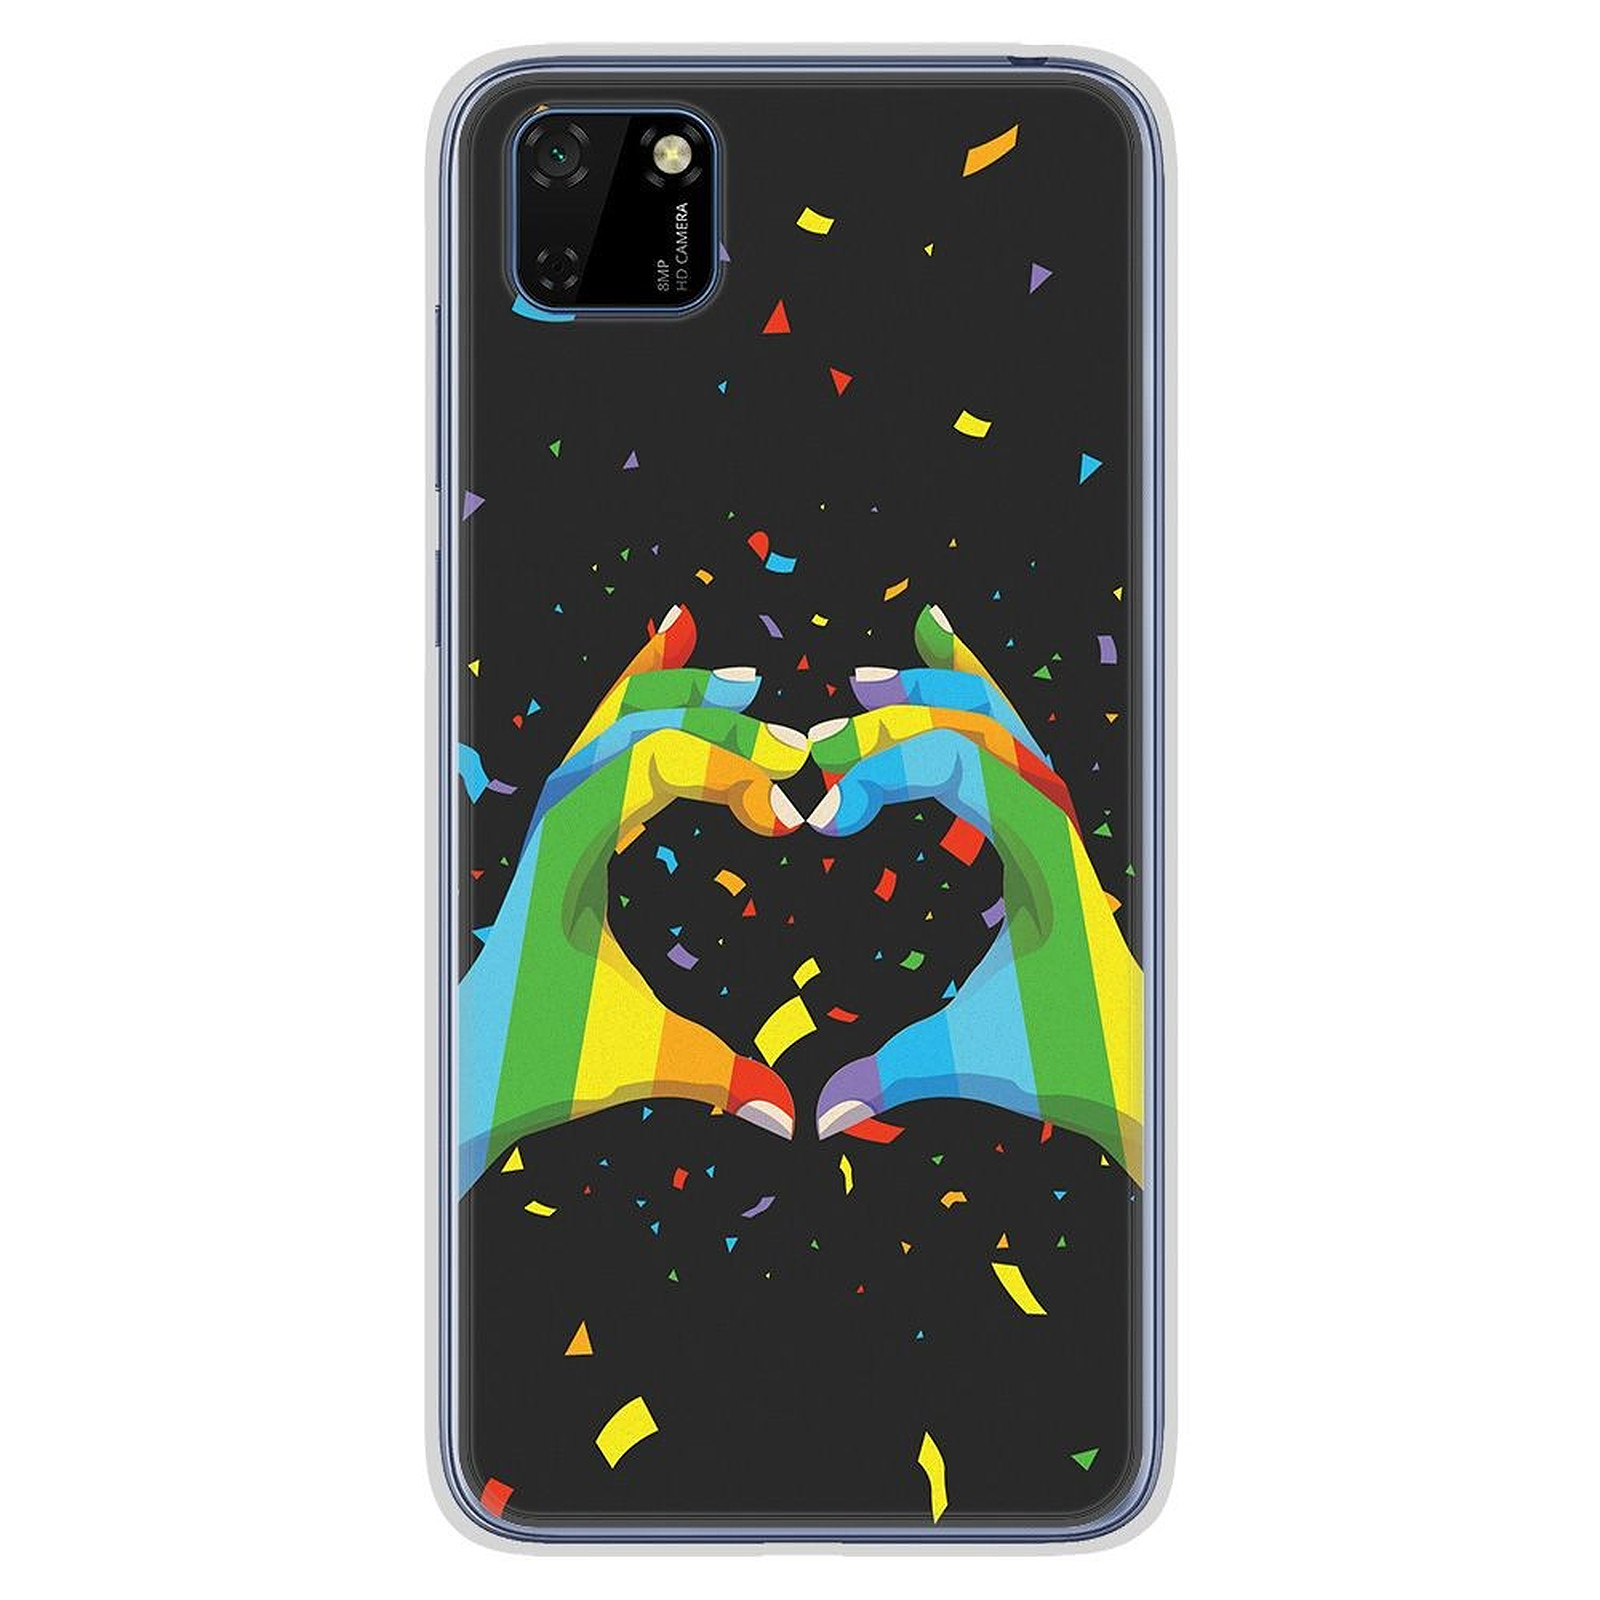 1001 Coques Coque silicone gel Huawei Y5P motif LGBT - Coque telephone 1001Coques